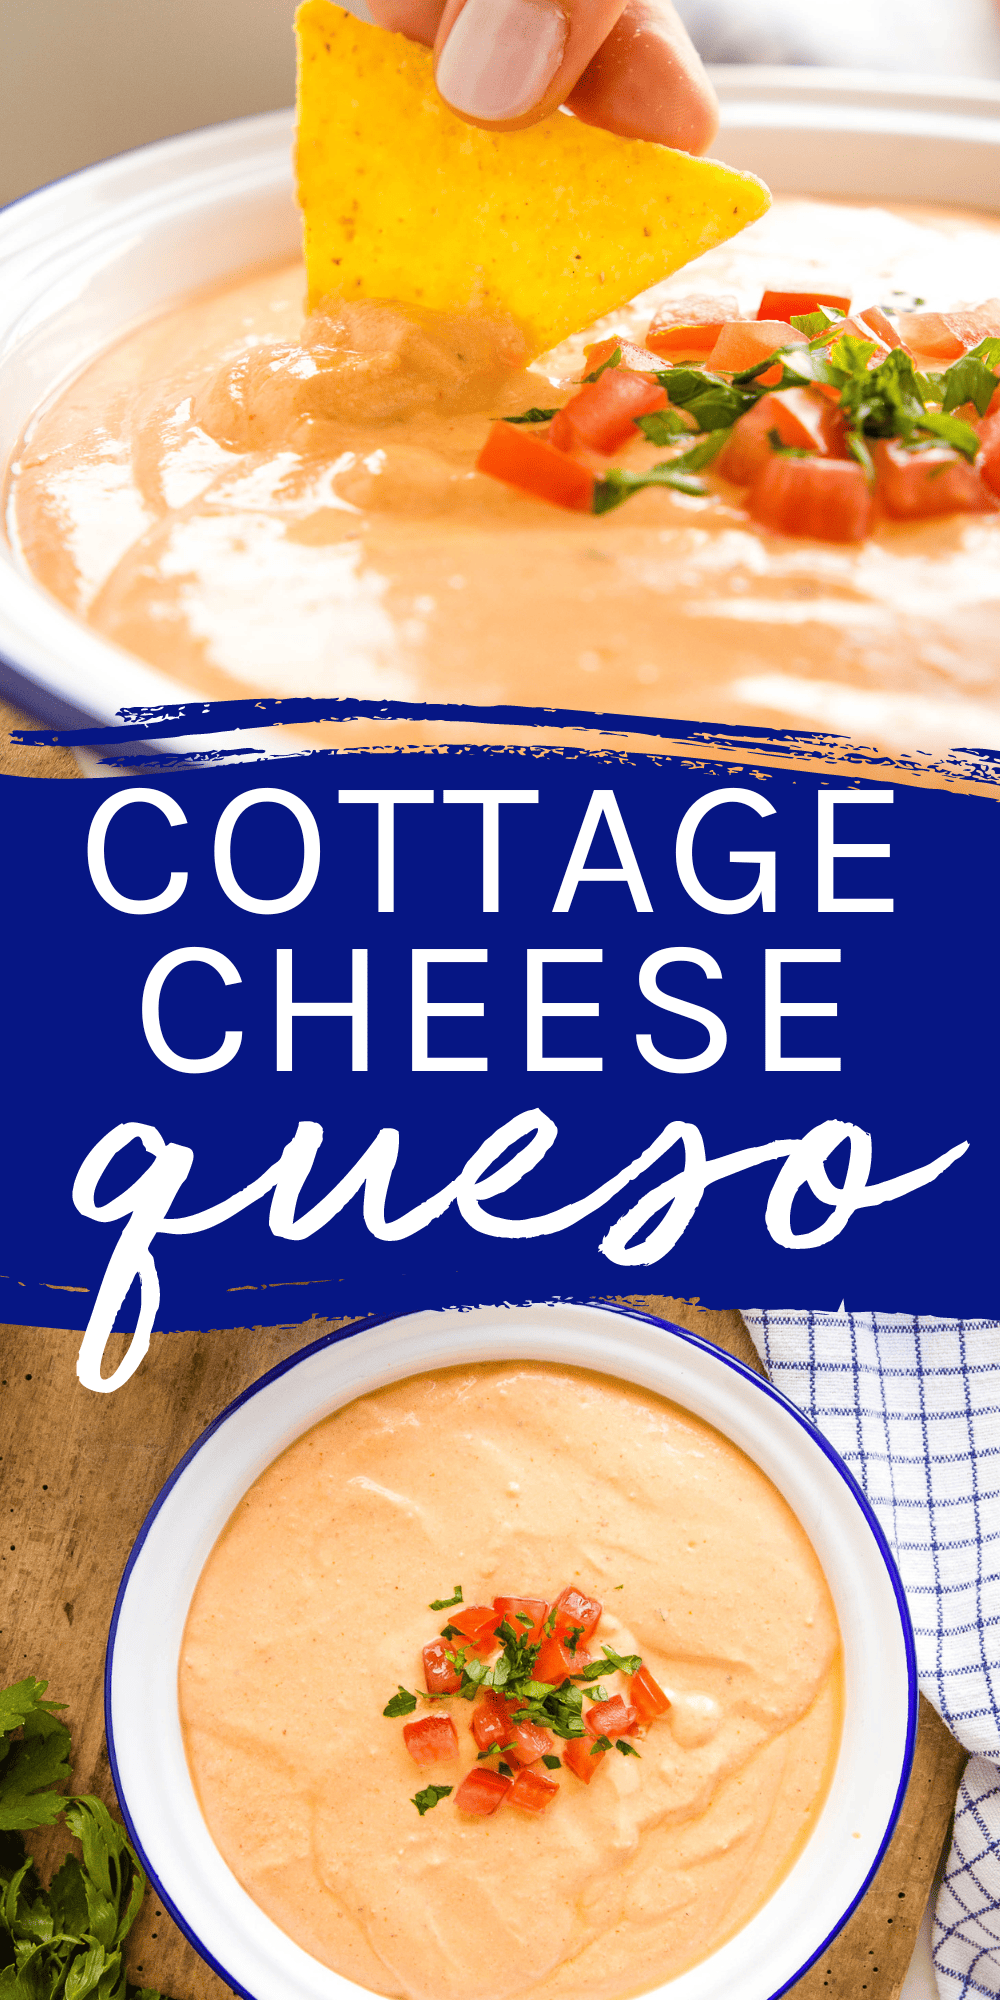 This Cottage Cheese Queso Dip recipe is a high-protein appetizer or snack recipe made with only 4 ingredients! A healthy version of the Mexican-style cheese dip that's easy to make in minutes! Recipe from thebusybaker.ca! #cottagecheesequeso #quesodip #healthyqueso #easyquesorecipe #proteinsnack #mexicandip #queso #easyqueso via @busybakerblog